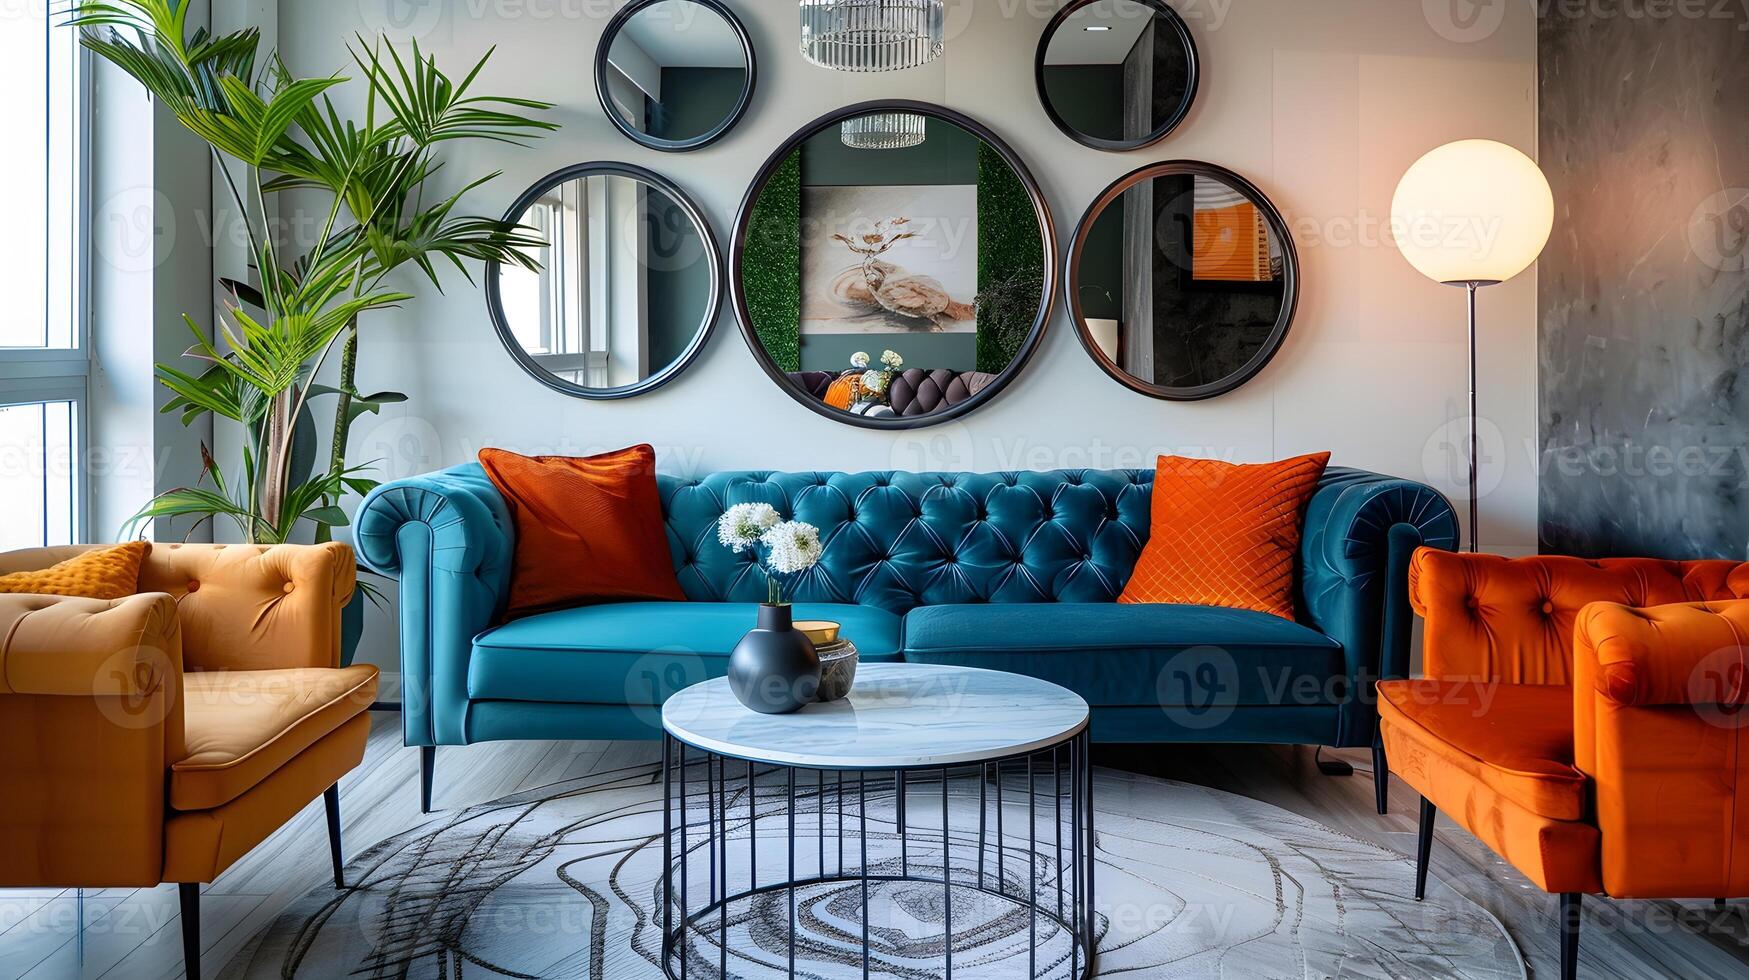 Modern Living Room with Teal Chesterfield Sofa and Tangerine Armchairs Embracing Latest Decor Trends photo